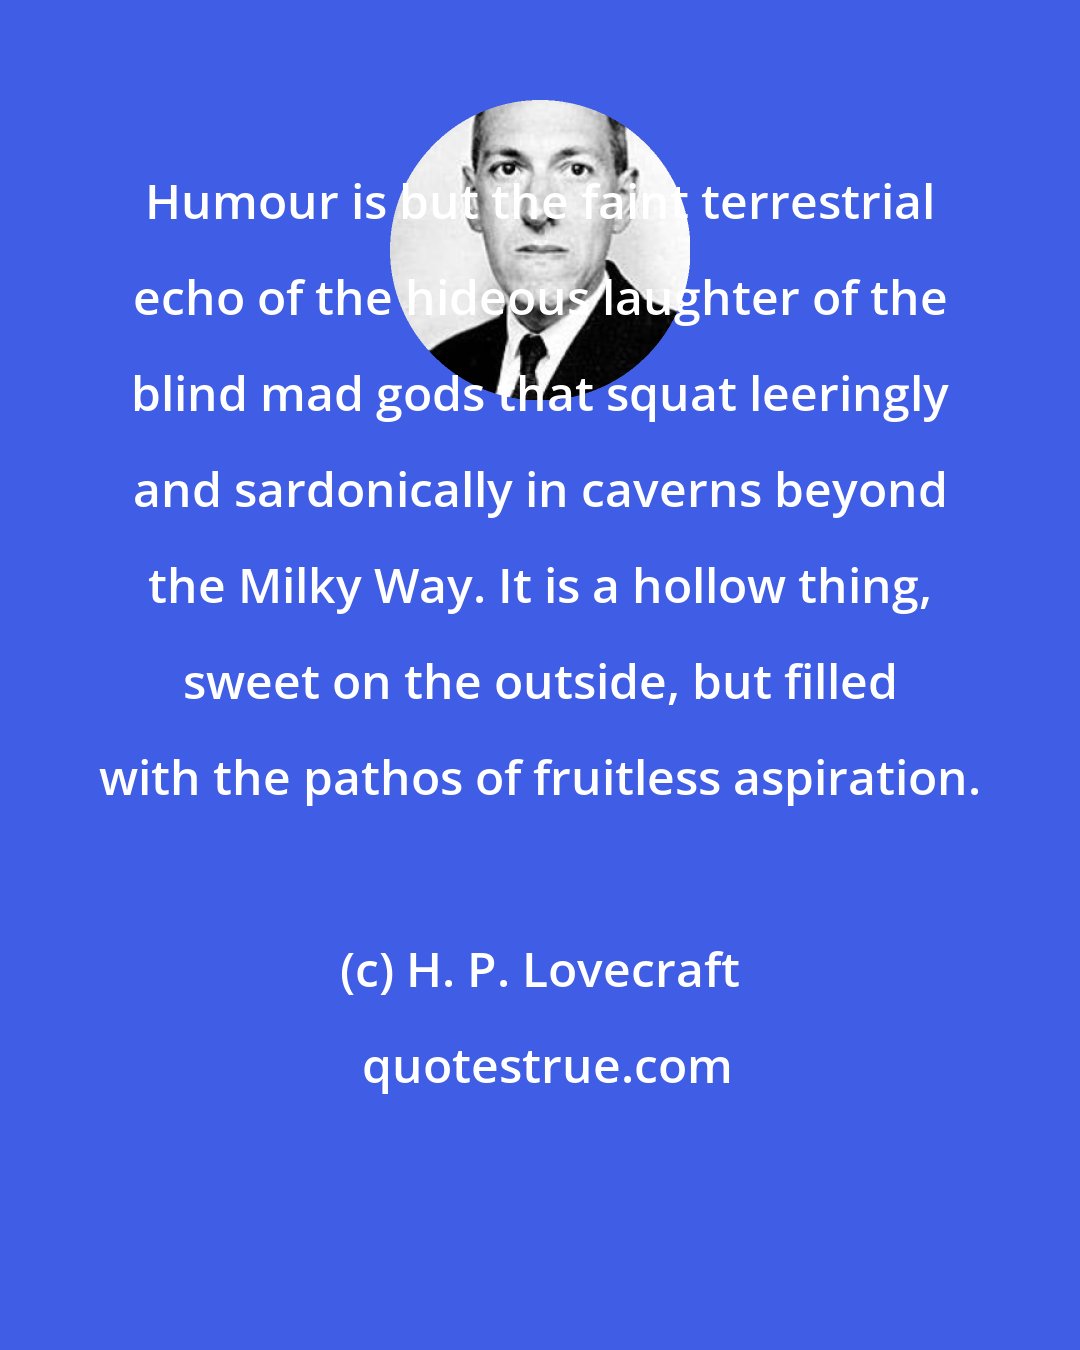 H. P. Lovecraft: Humour is but the faint terrestrial echo of the hideous laughter of the blind mad gods that squat leeringly and sardonically in caverns beyond the Milky Way. It is a hollow thing, sweet on the outside, but filled with the pathos of fruitless aspiration.